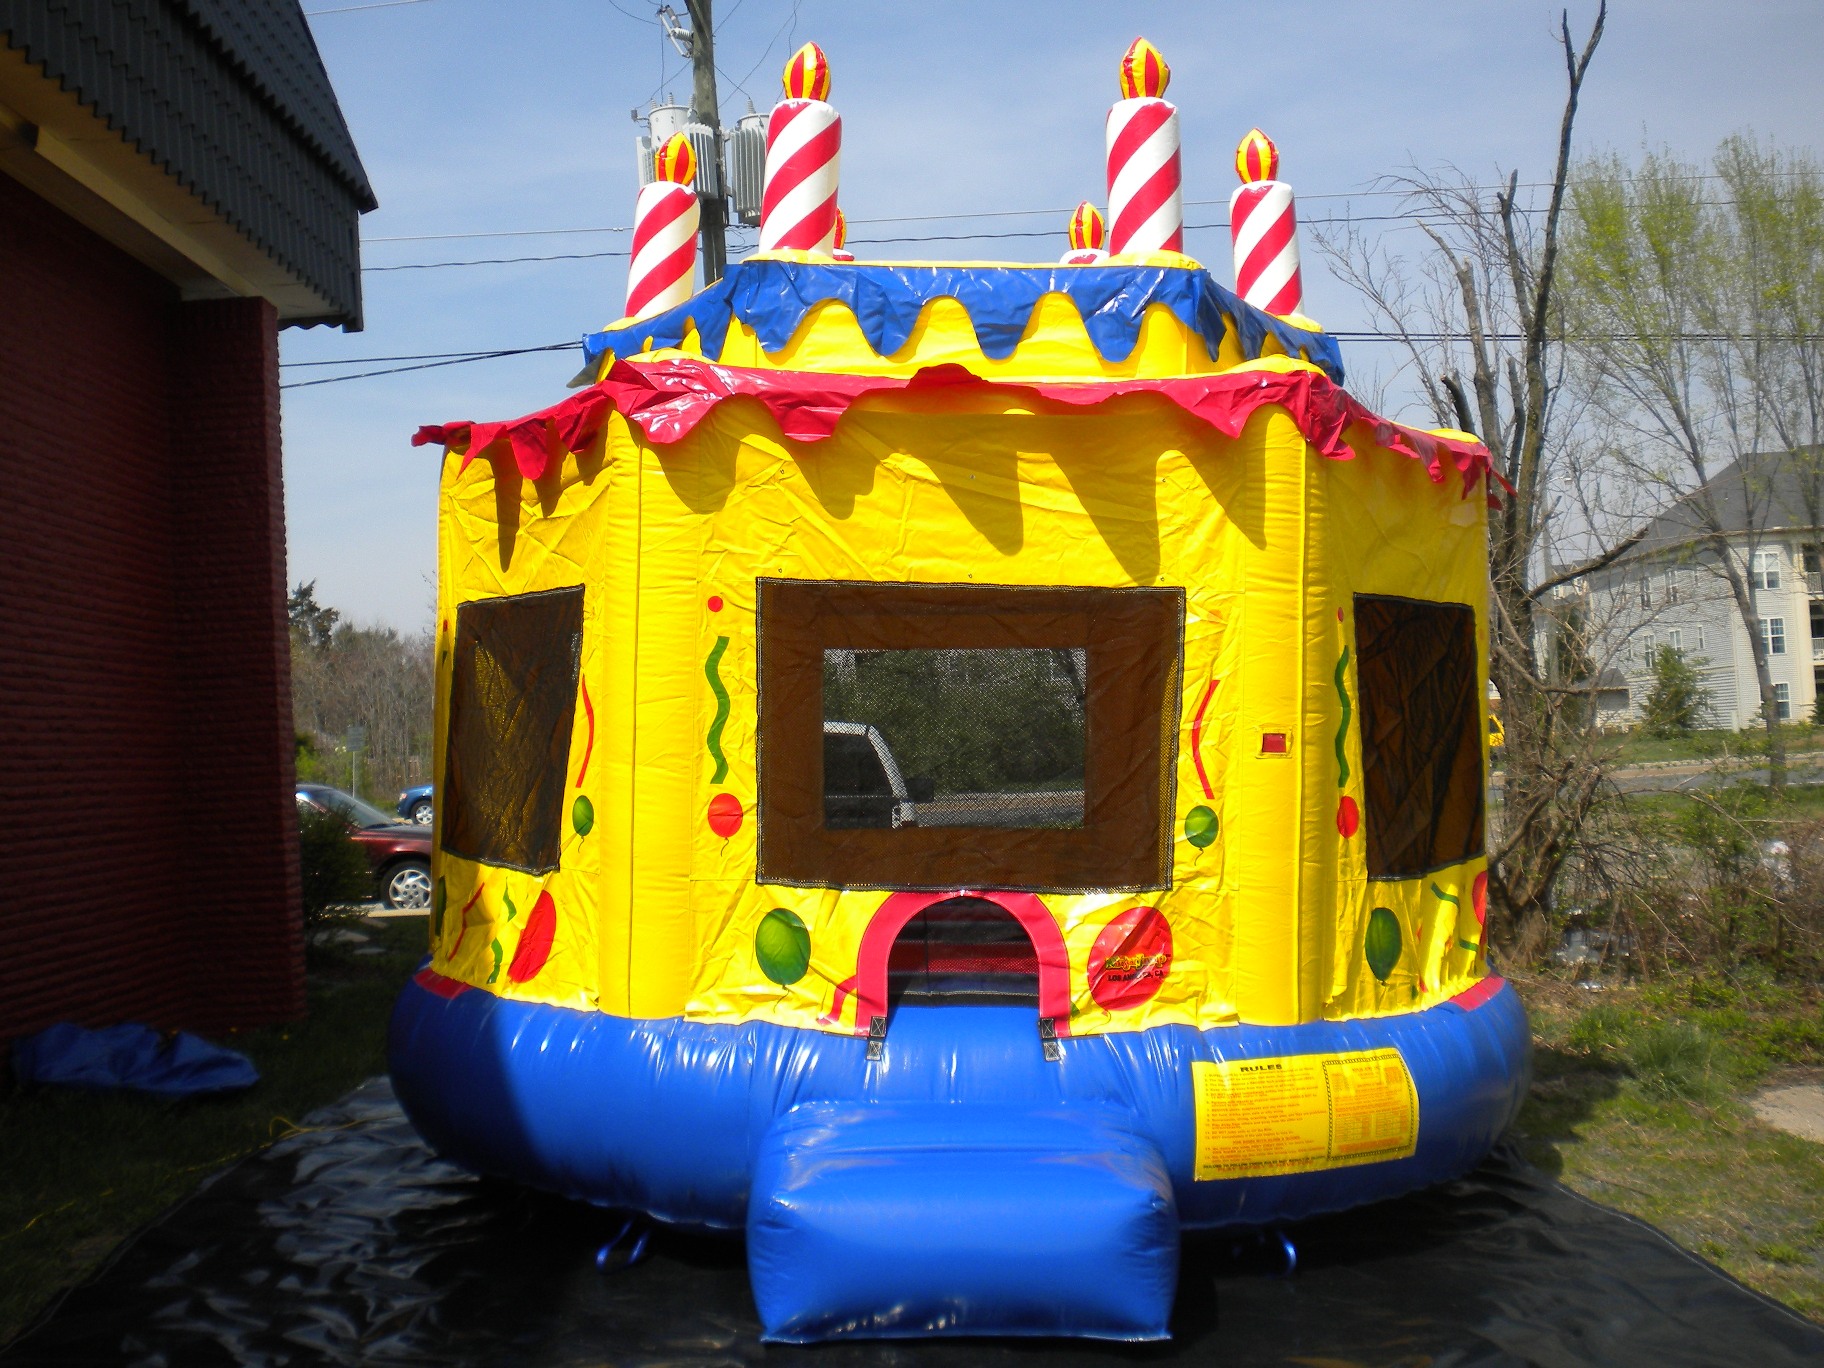 Cake Jumper Moonbounce Bounce House Front View